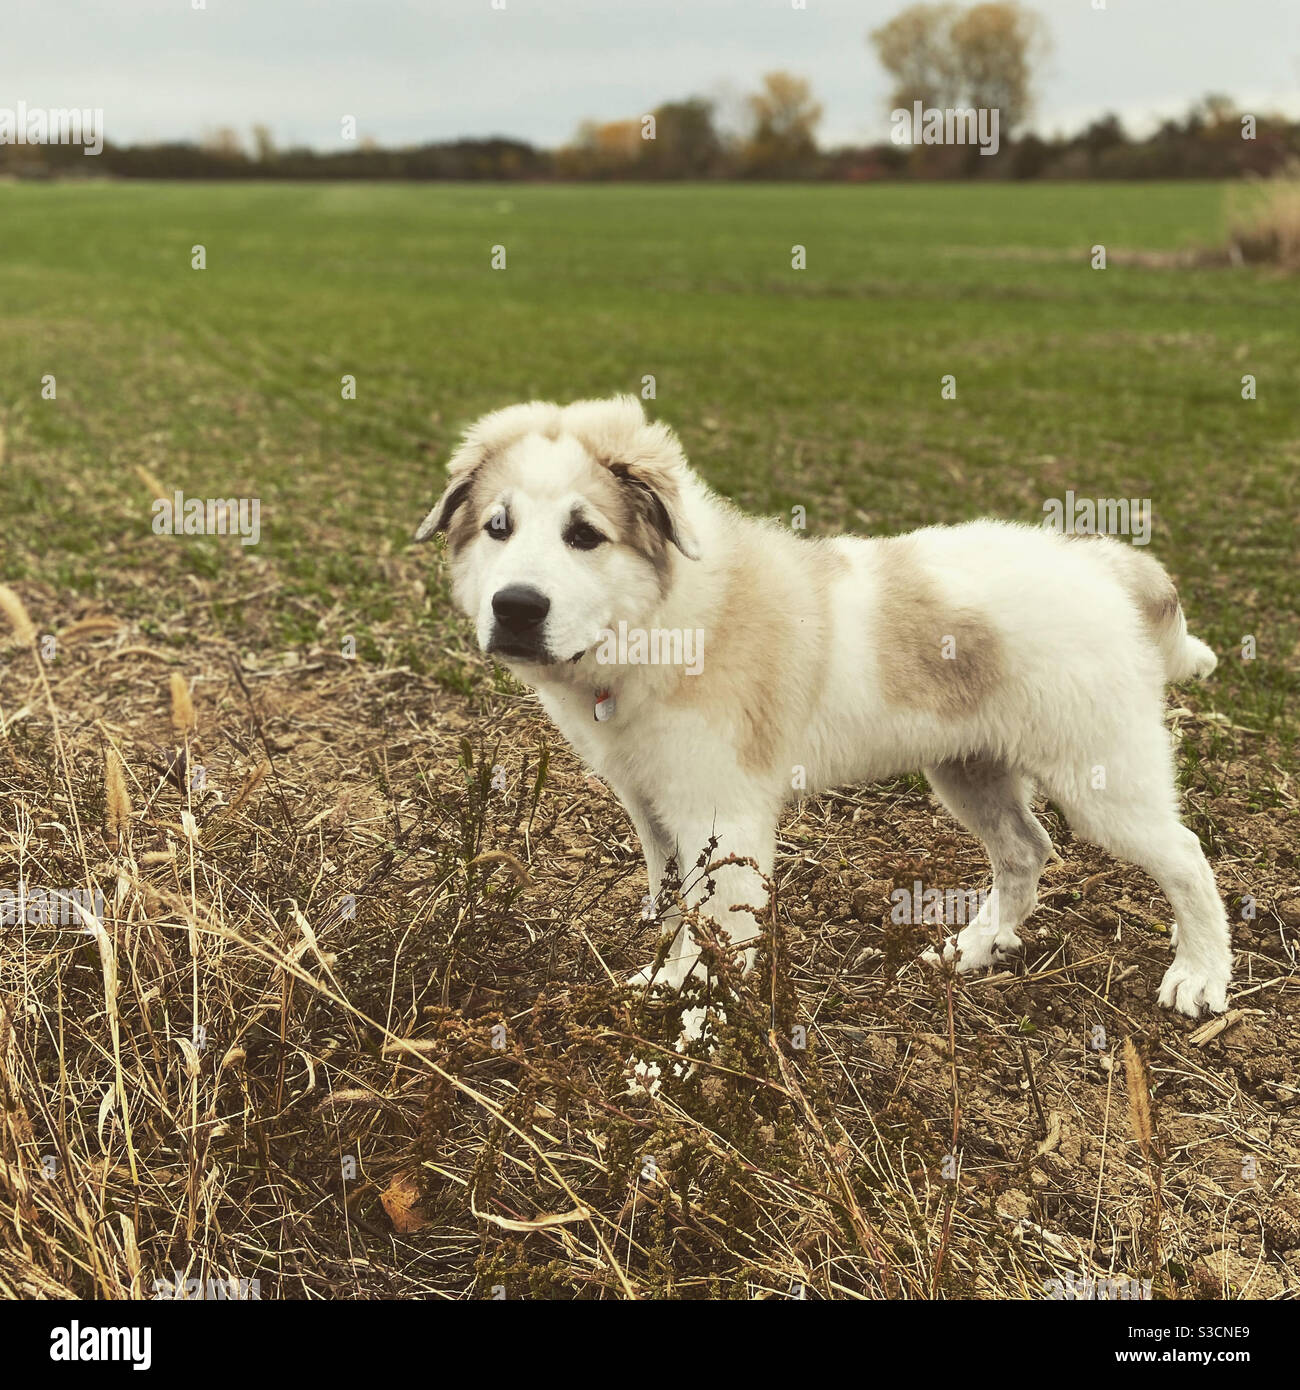 Cute, fluffy, white Great Pyrenees puppy dog standing in a farmer’s field outside in the autumn while on a dog walk with family Stock Photo